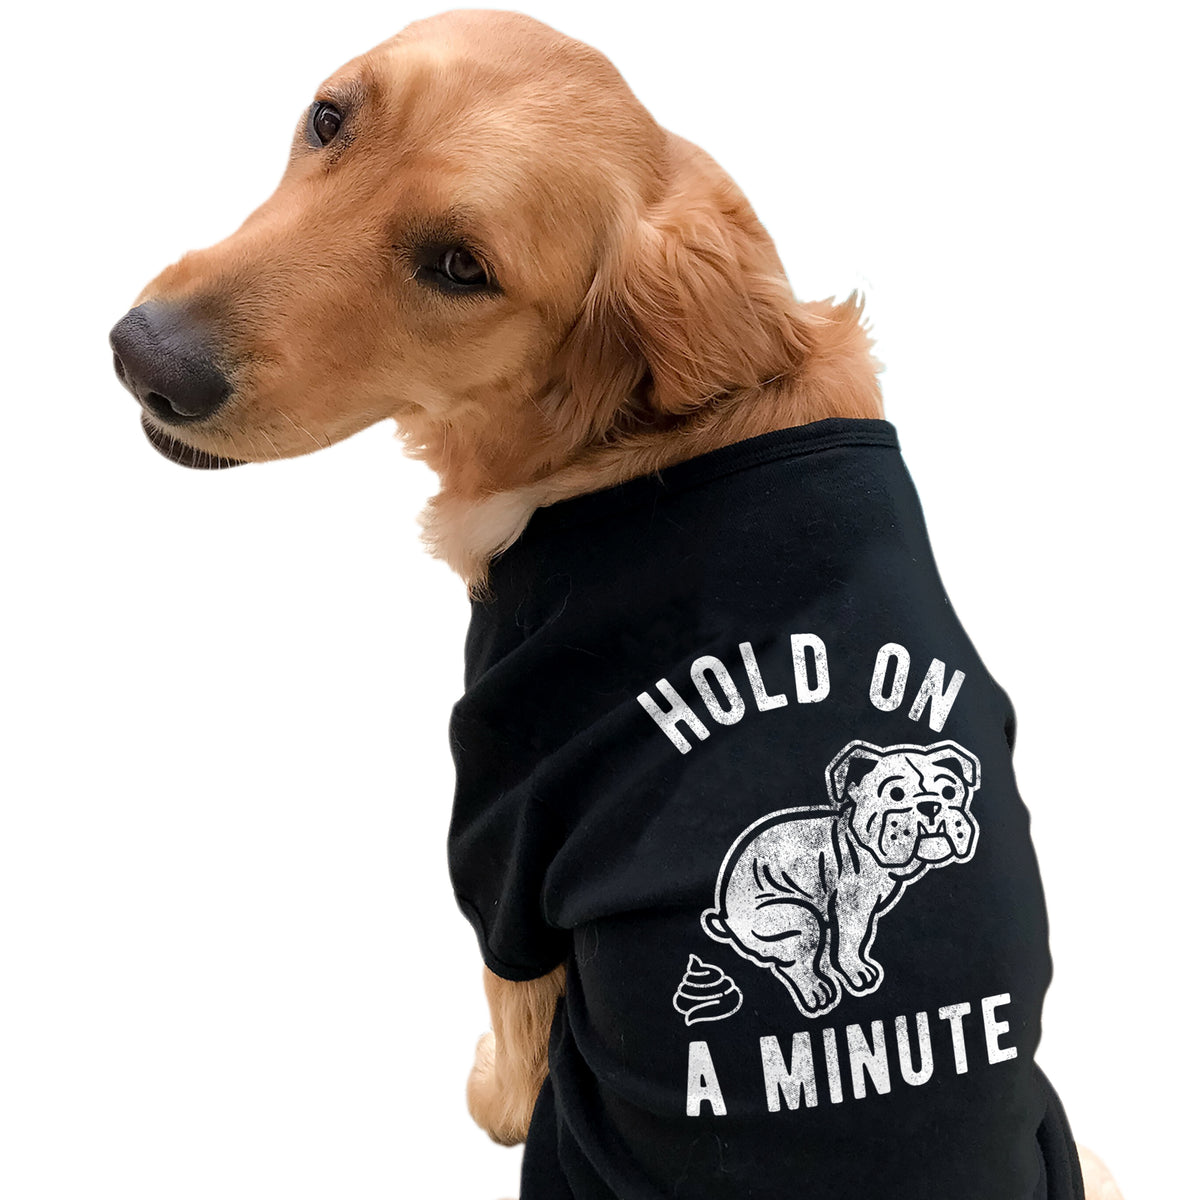 Hold On A Minute Dog Shirt